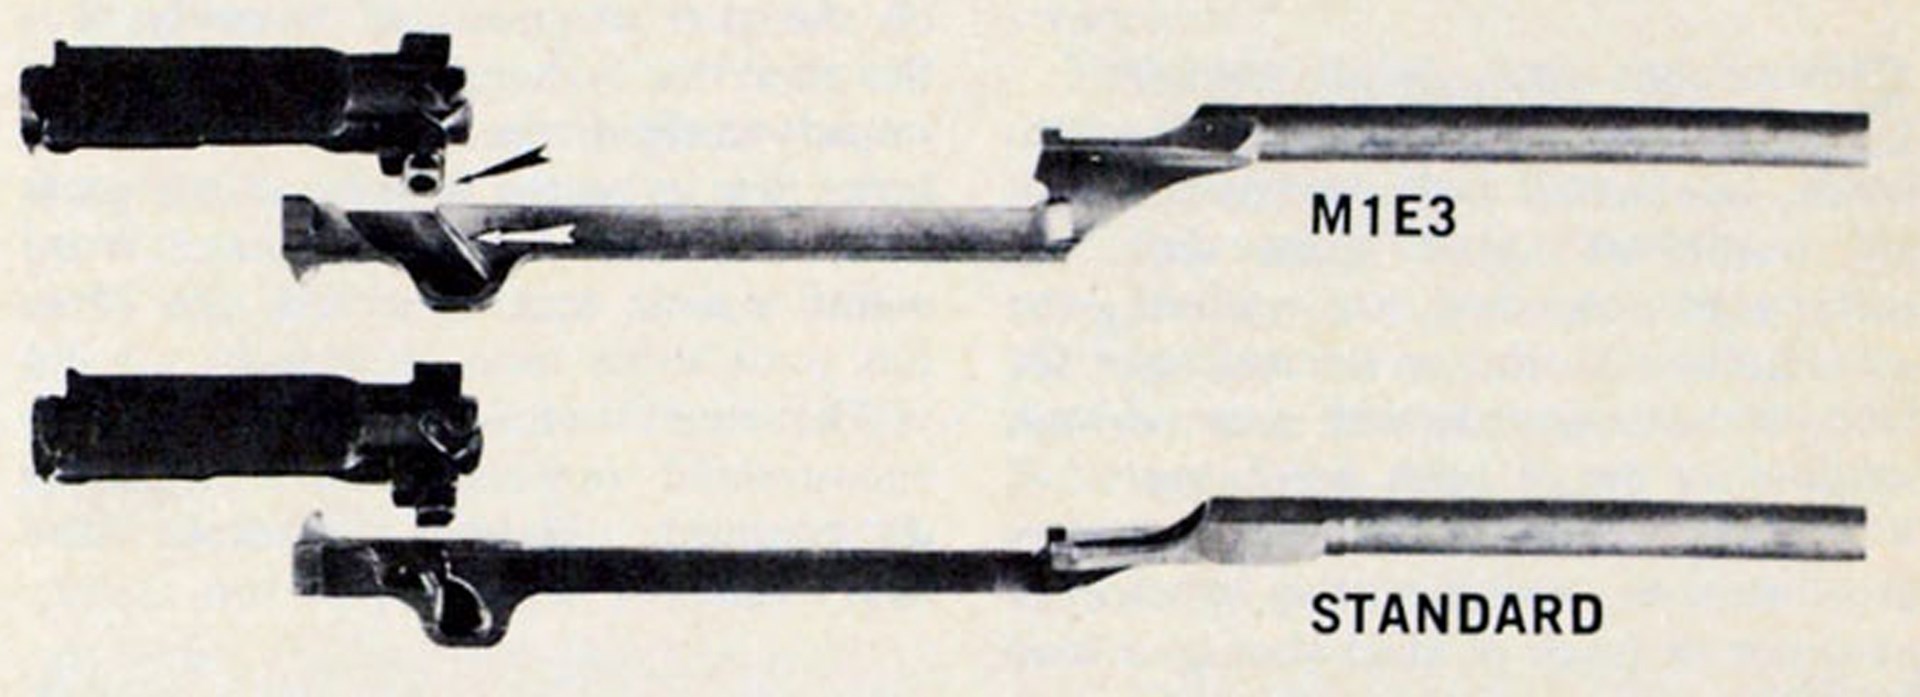 m1e3 bolt and operating rod compared over standard m1 bolt and operating rod.